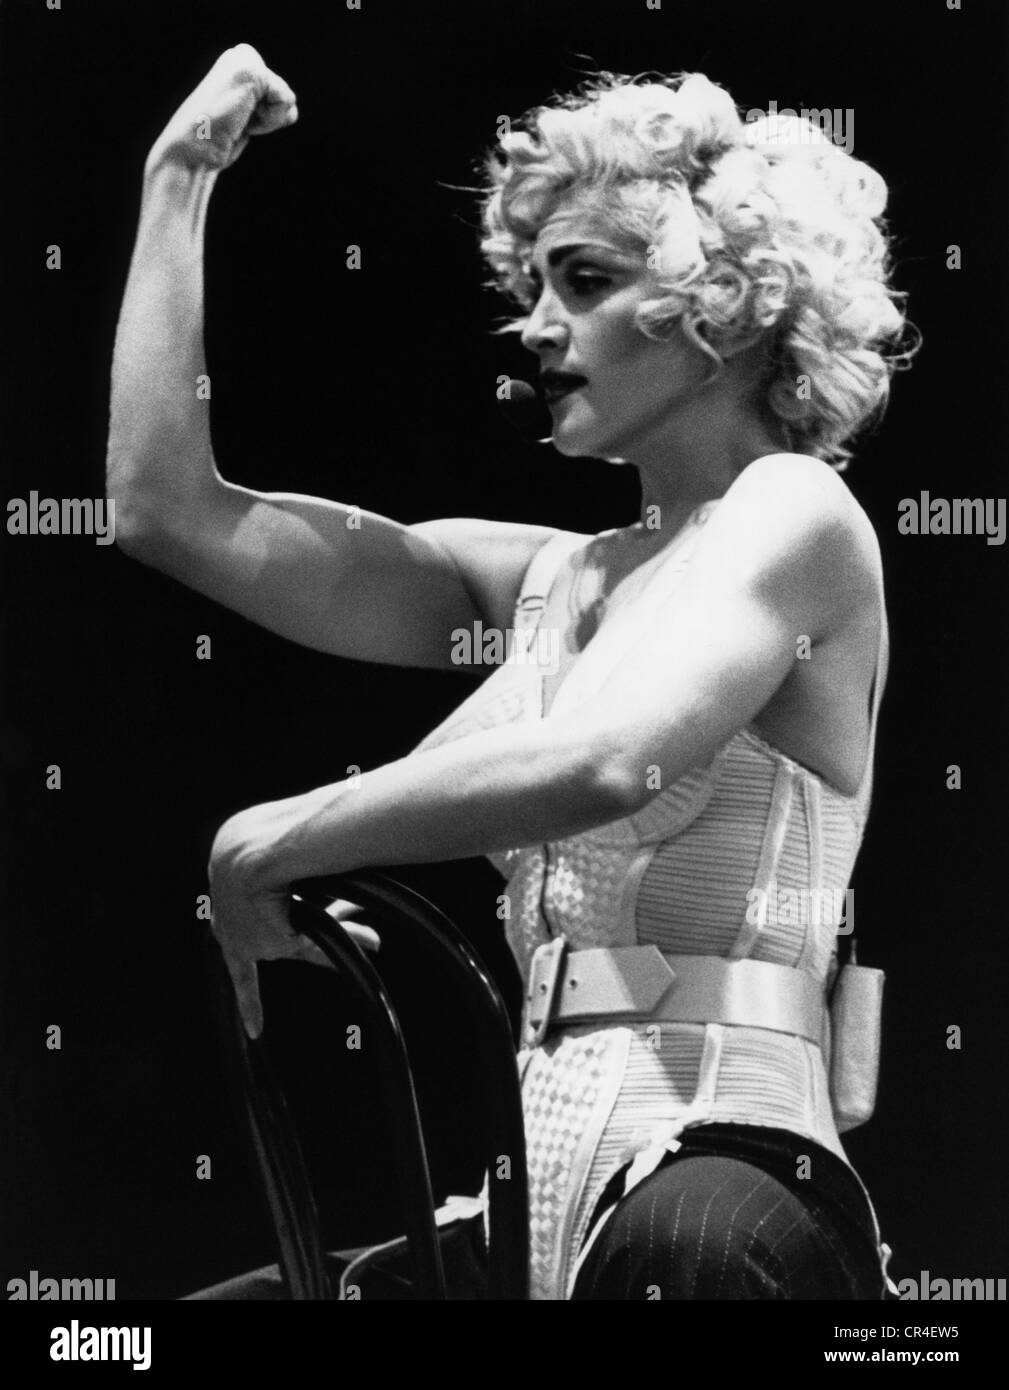 Madonna, * 16.6.1958, US singer, half length, during a concert in Riem near Munich, Germany, 16.7.1990, Stock Photo